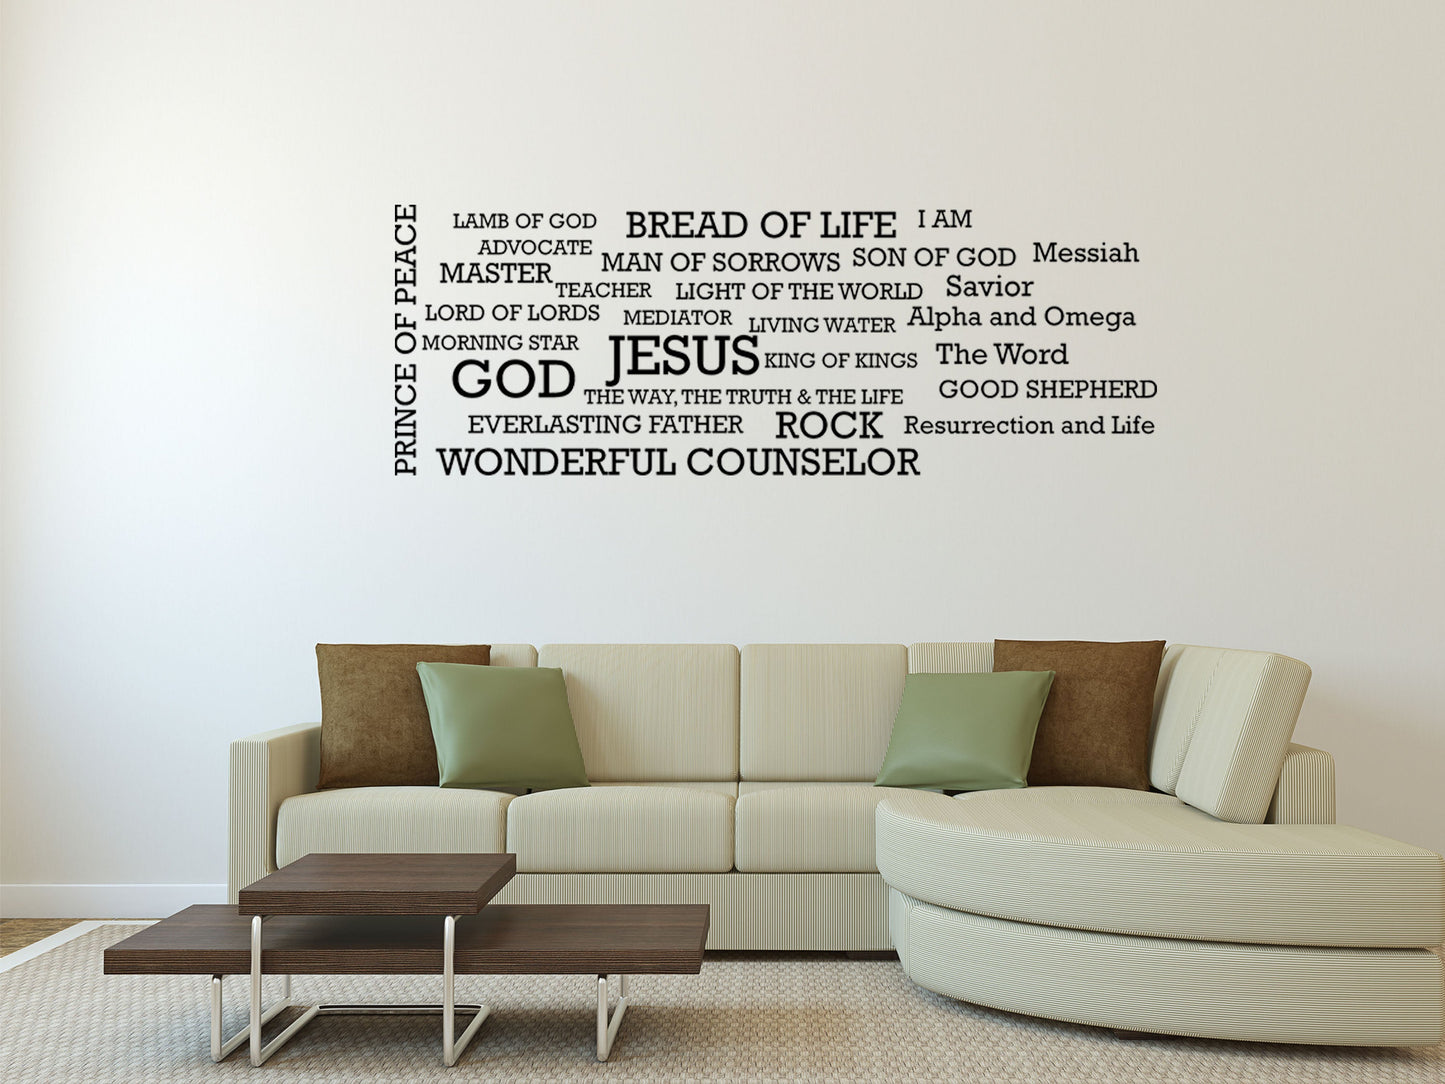 Names Of God Word Cloud Christian Wall Decal Vinyl Wall Decal Inspirational Wall Signs 